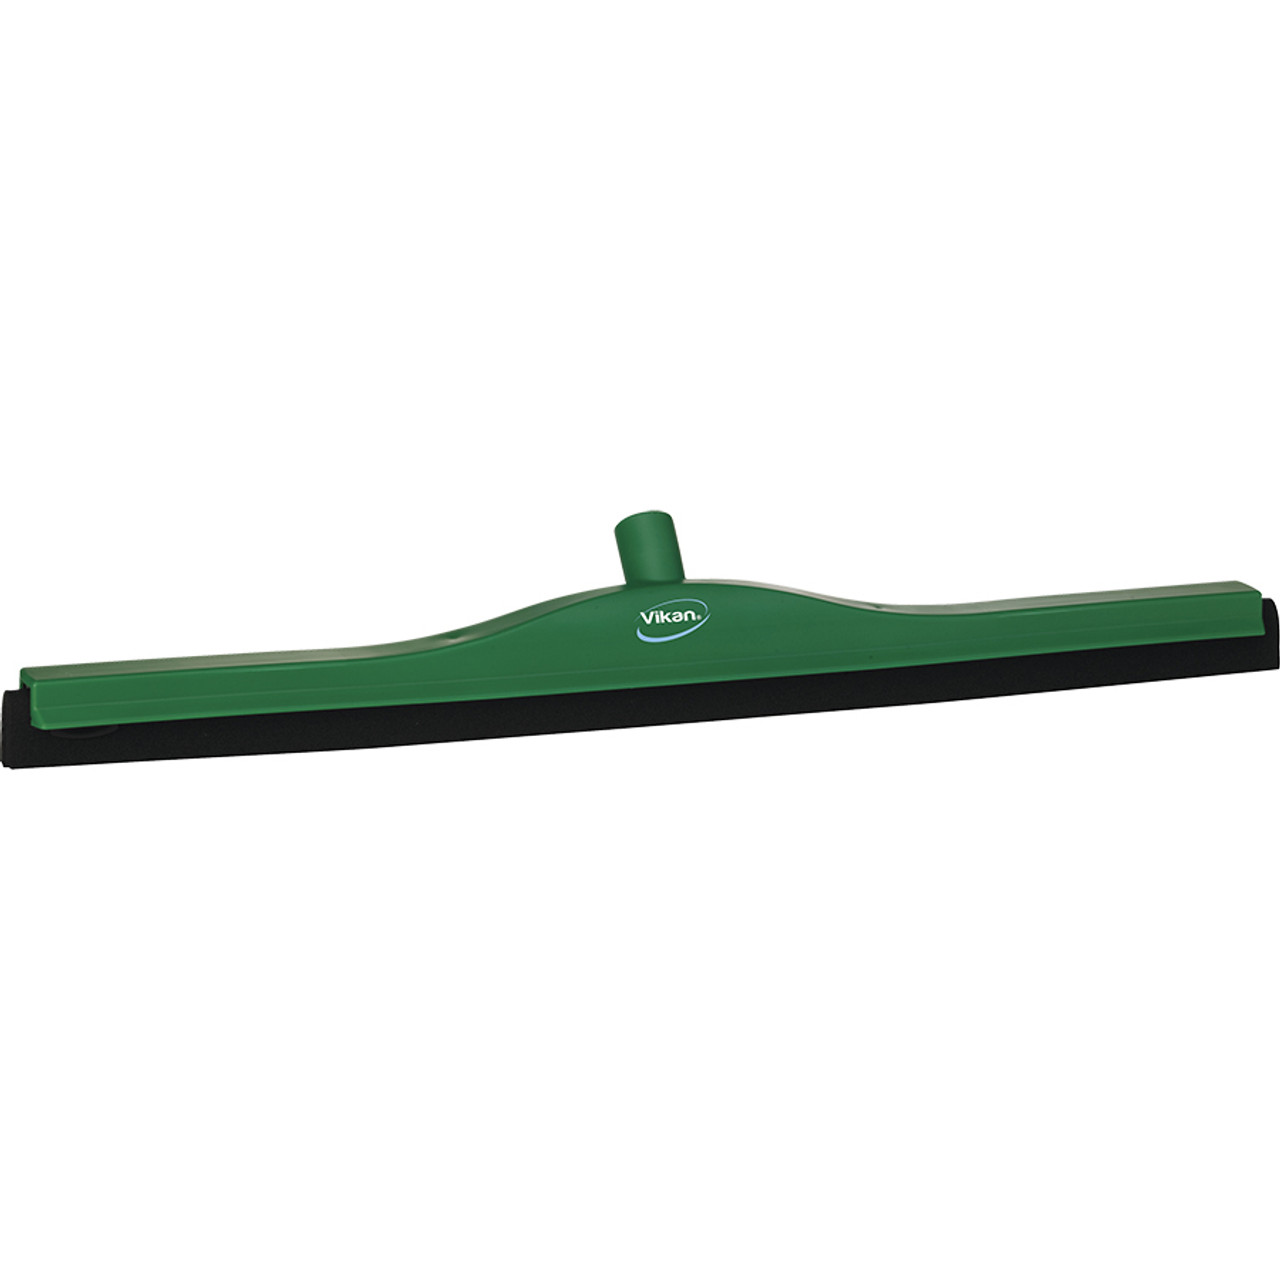 Vikan 7755 28 Double Foam Squeegee with 60 Polypro Handle